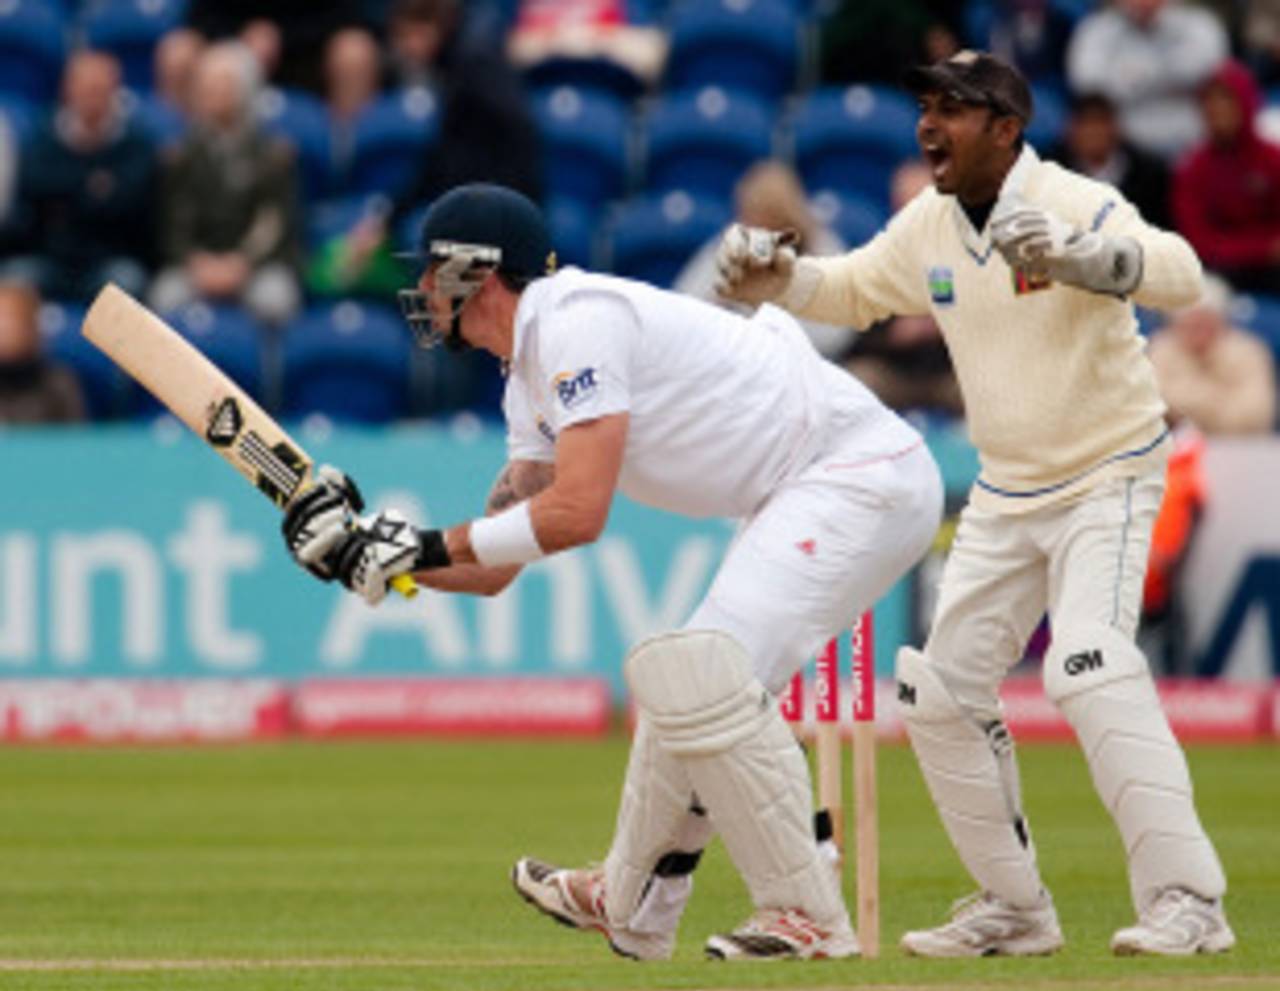 Kevin Pietersen gets into a tangle against Rangana Herath, England v Sri Lanka, 1st Test, Cardiff, 4th day, May 29, 2011